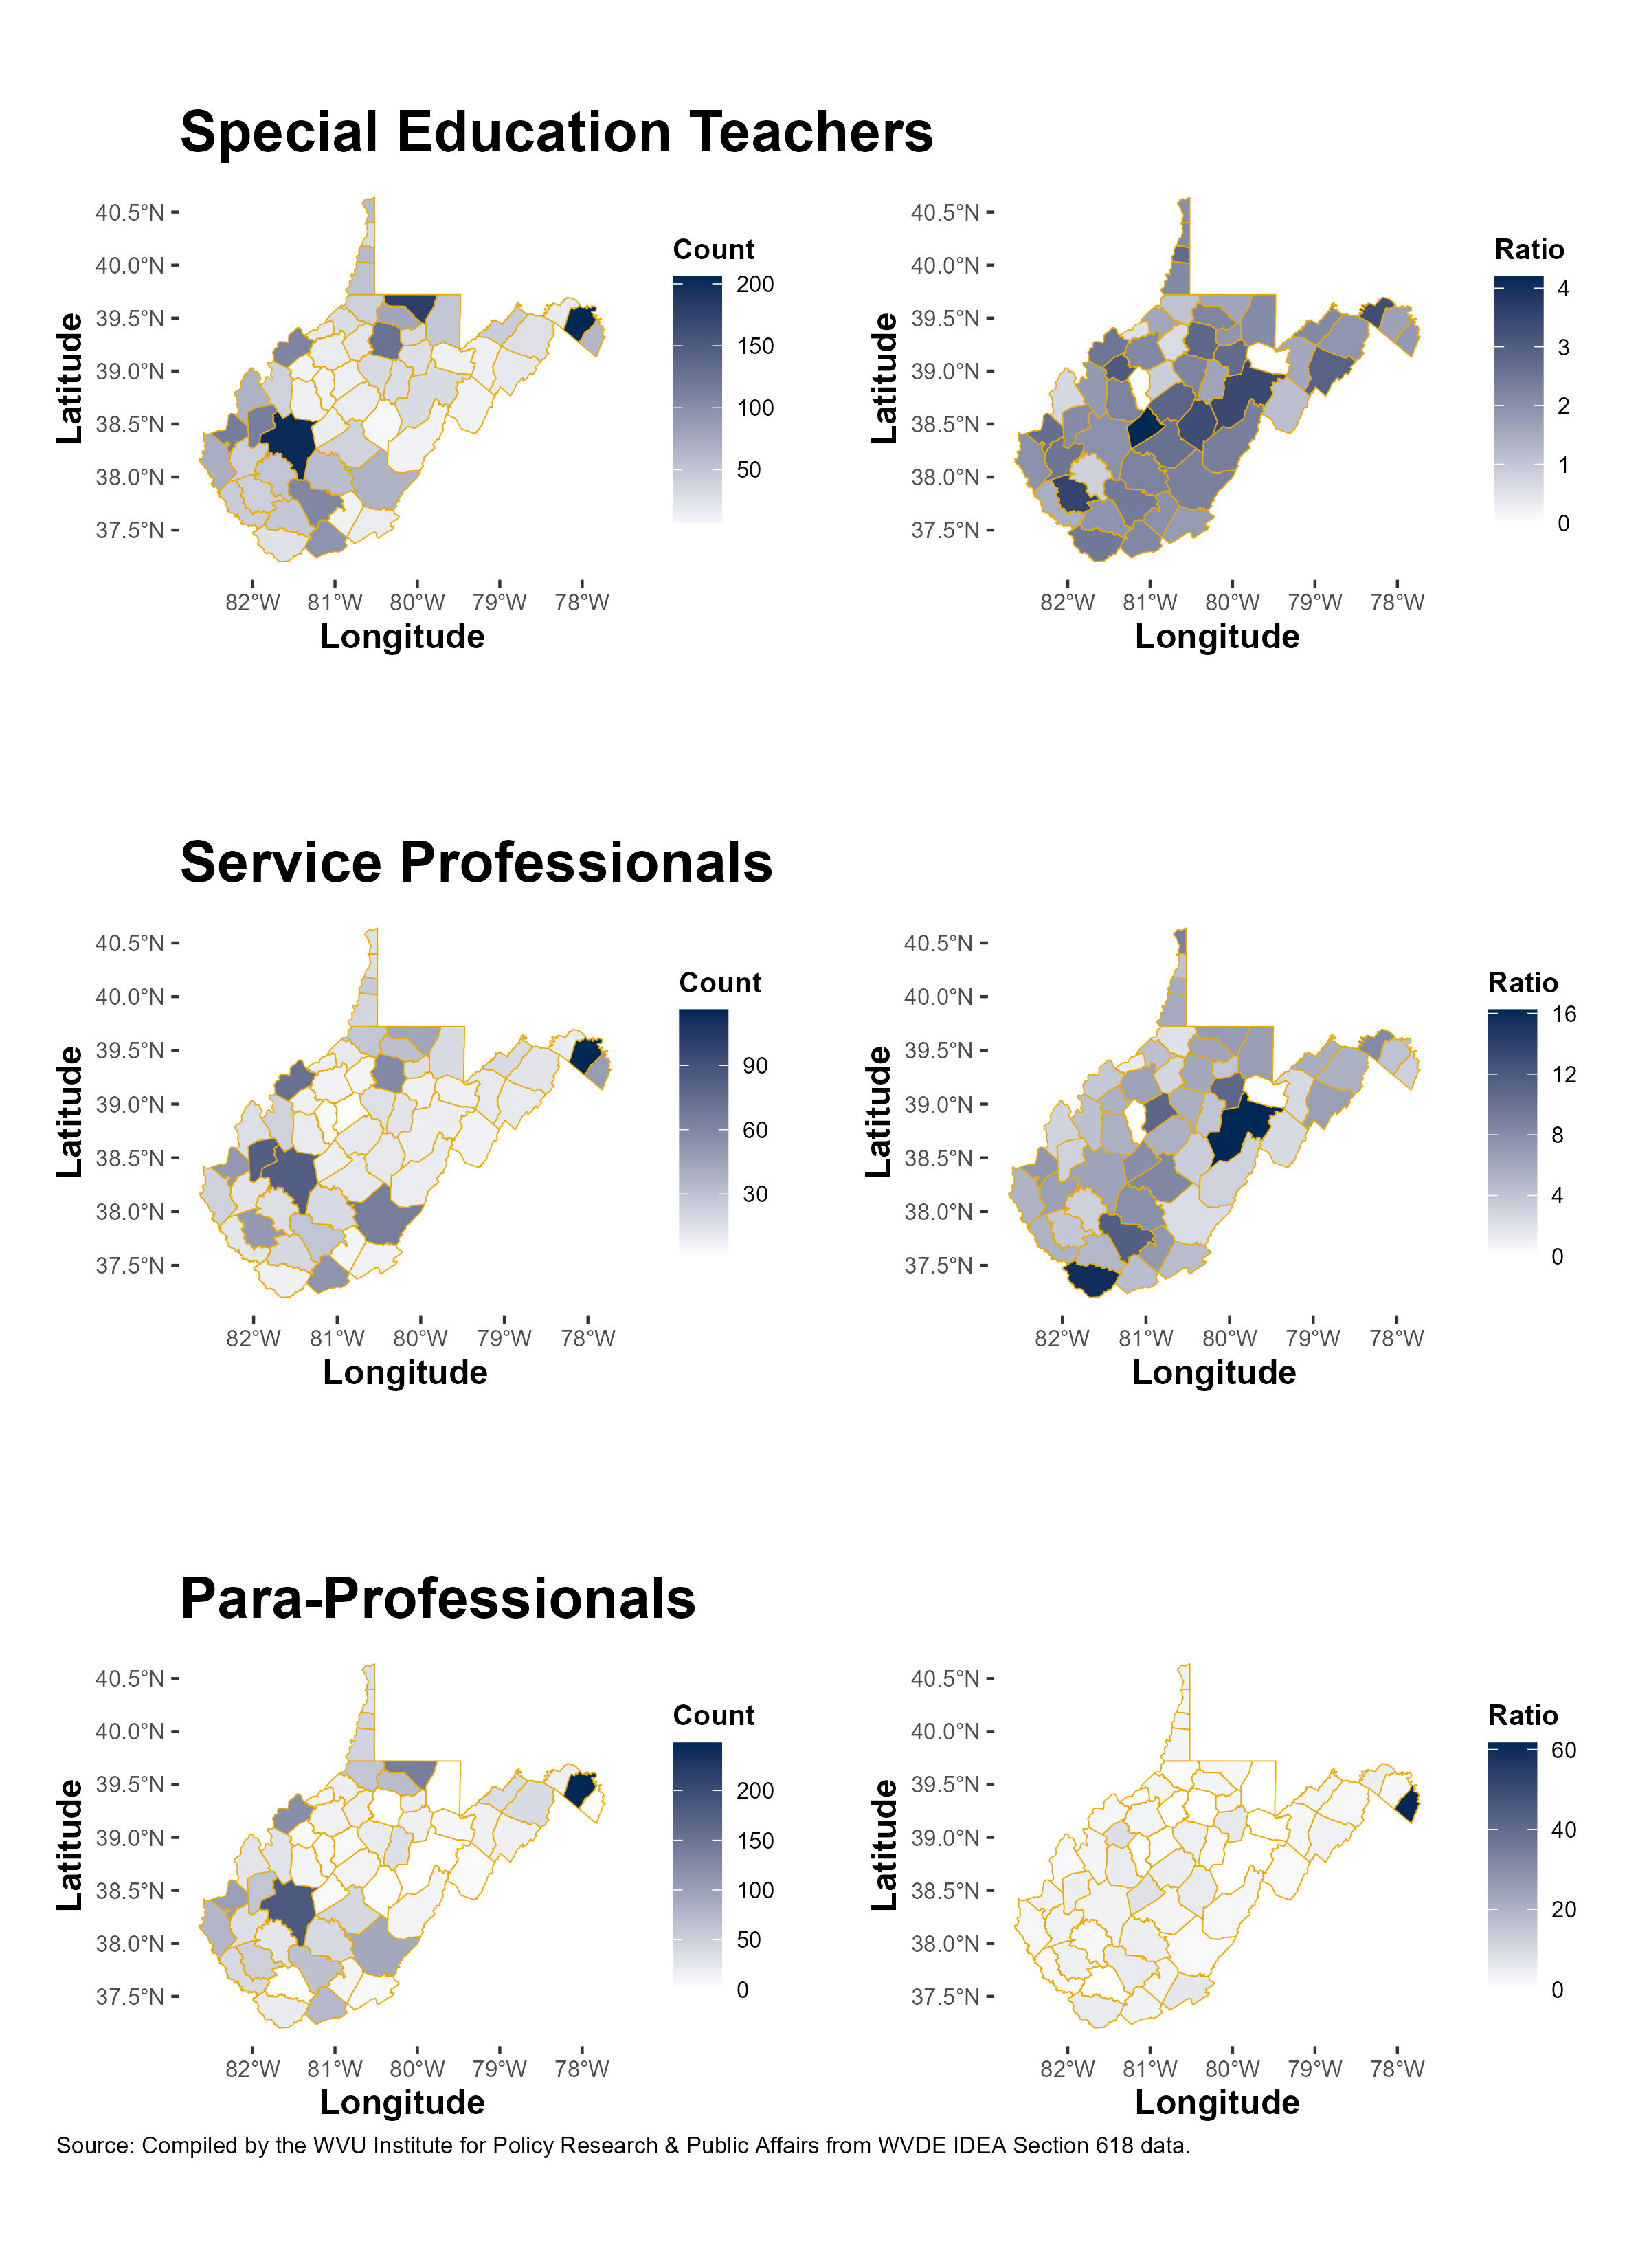 Figure 10: County chloropleth maps for the rates of students to teachers, service professionals, and para-professionals.